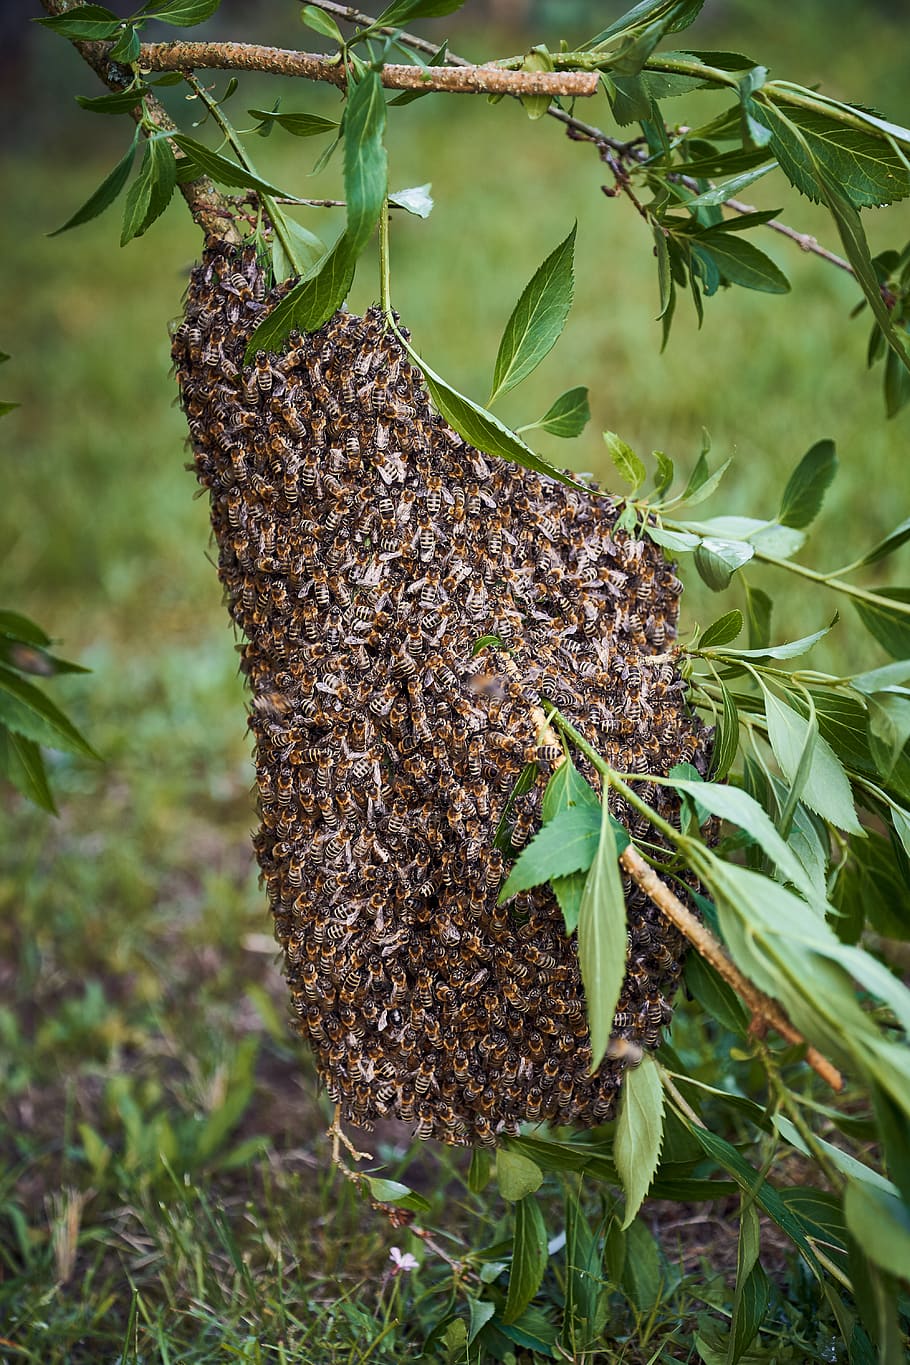 bees, beehive, hive, insect, honey bees, bee keeping, honey, nature, garden, flight insect